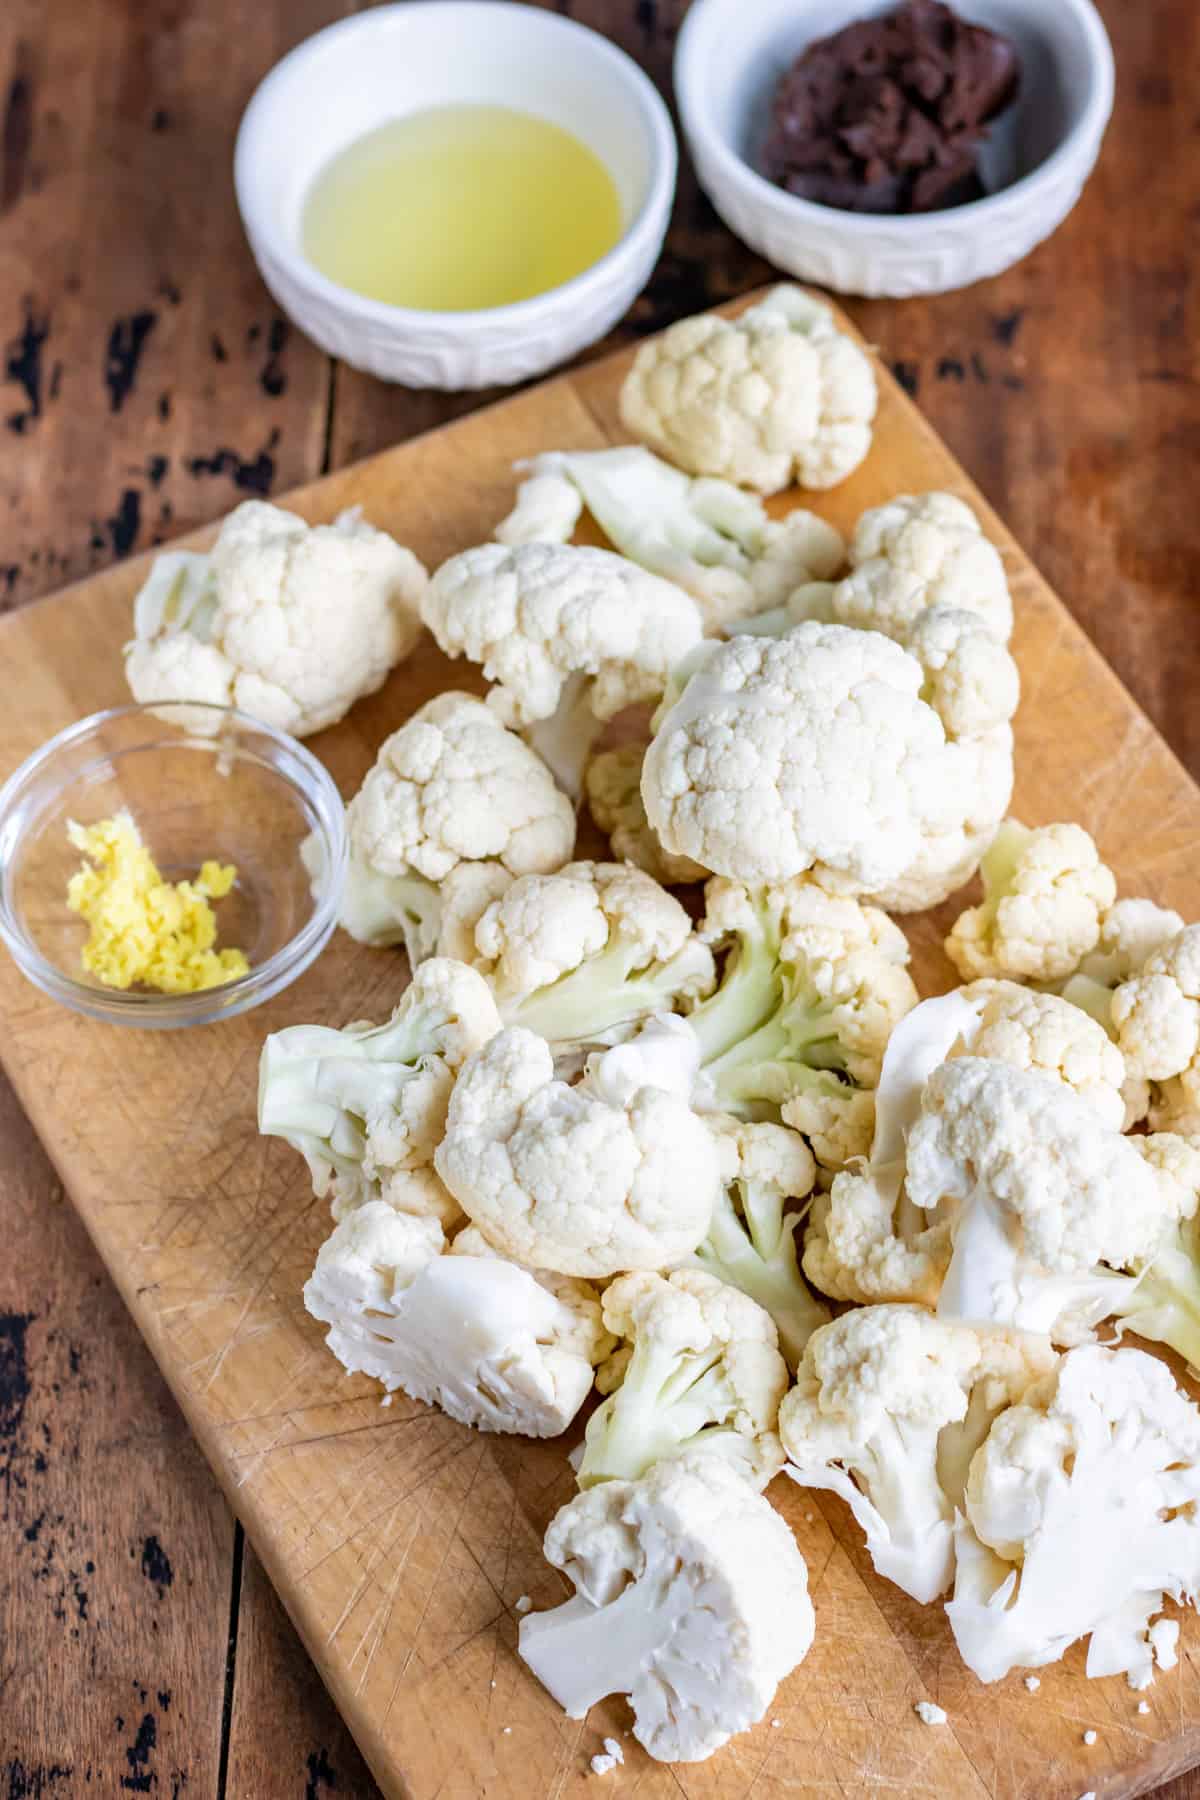 Chopped cauliflower next to ginger and miso.